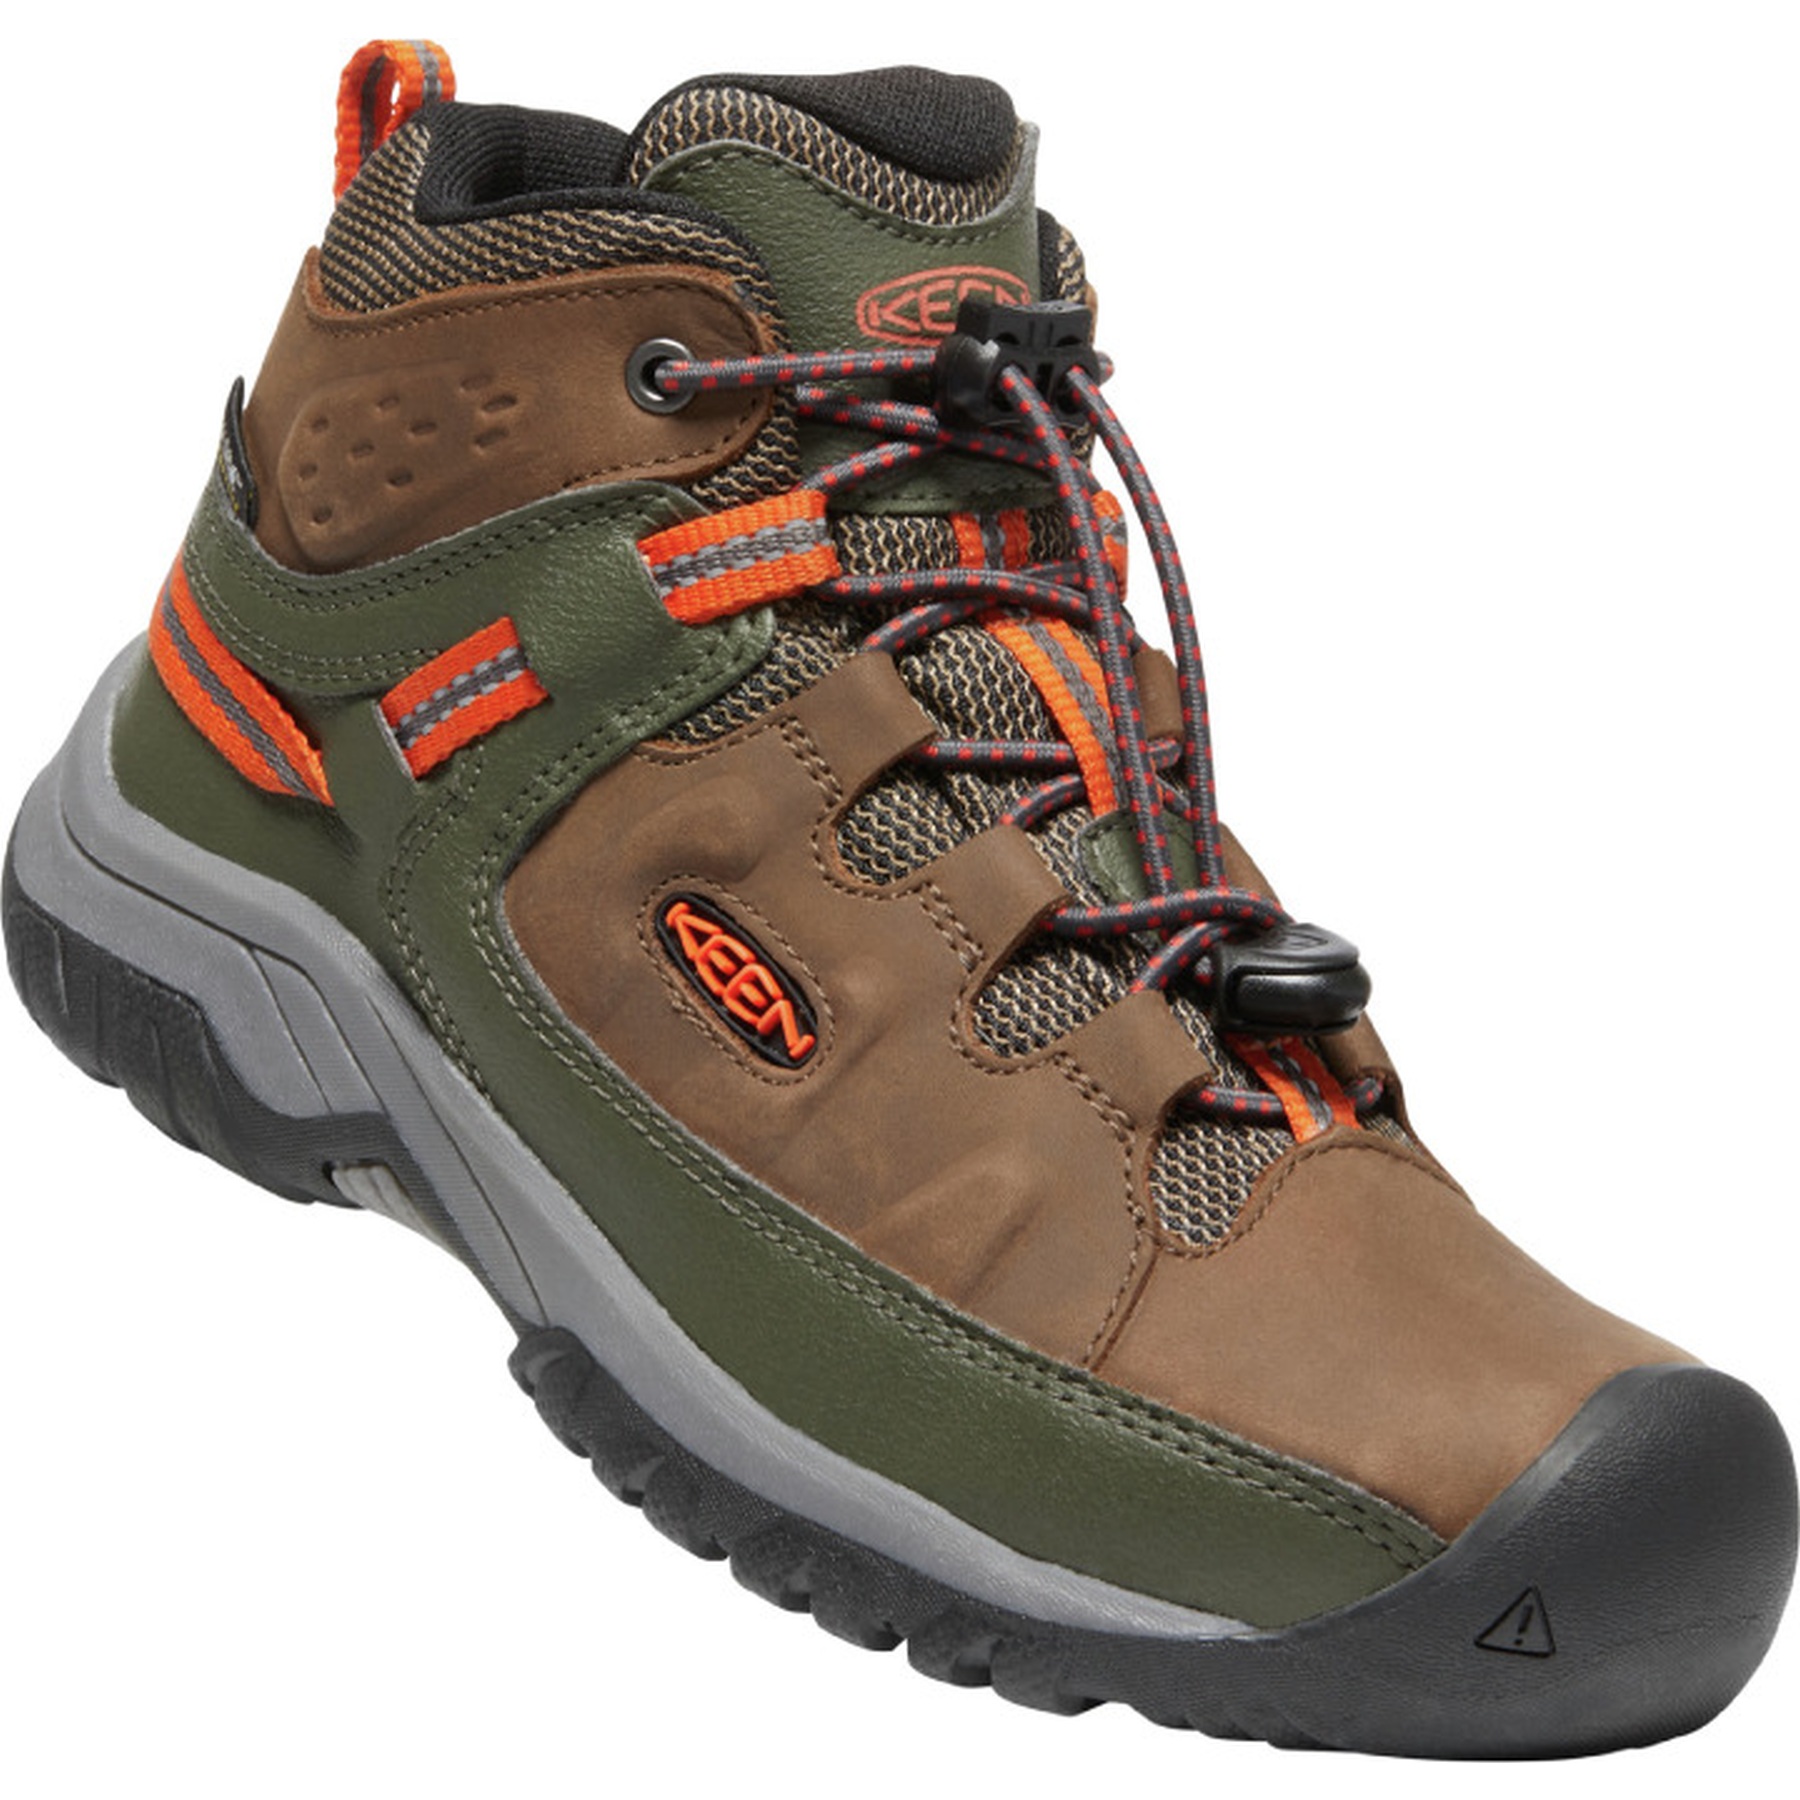 Picture of KEEN Targhee Mid Waterproof Kids Hiking Boots - Dark Earth / Forest Night (Size 32-39)